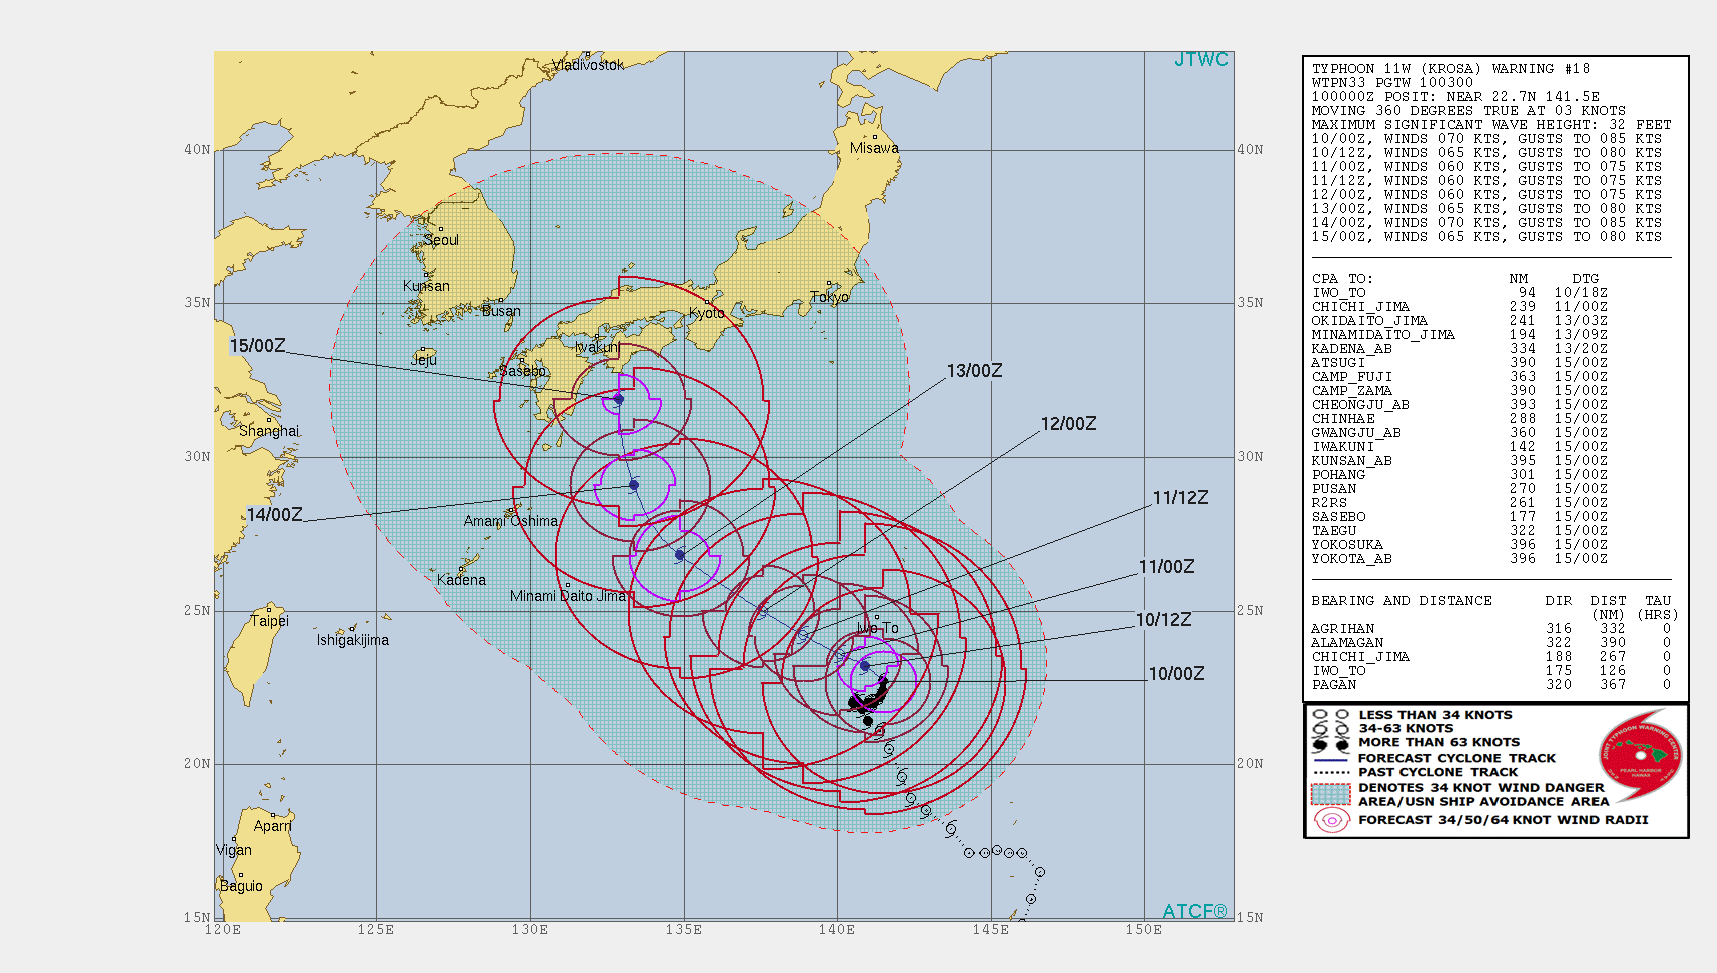 KROSA(11W): WARNING 18. FORECAST TO BE BELOW TYPHOON INTENSITY IN 24H BUT FORECAST TO APPROACH SOUTHERN JAPAN AS A MINIMAL TYPHOON AGAIN